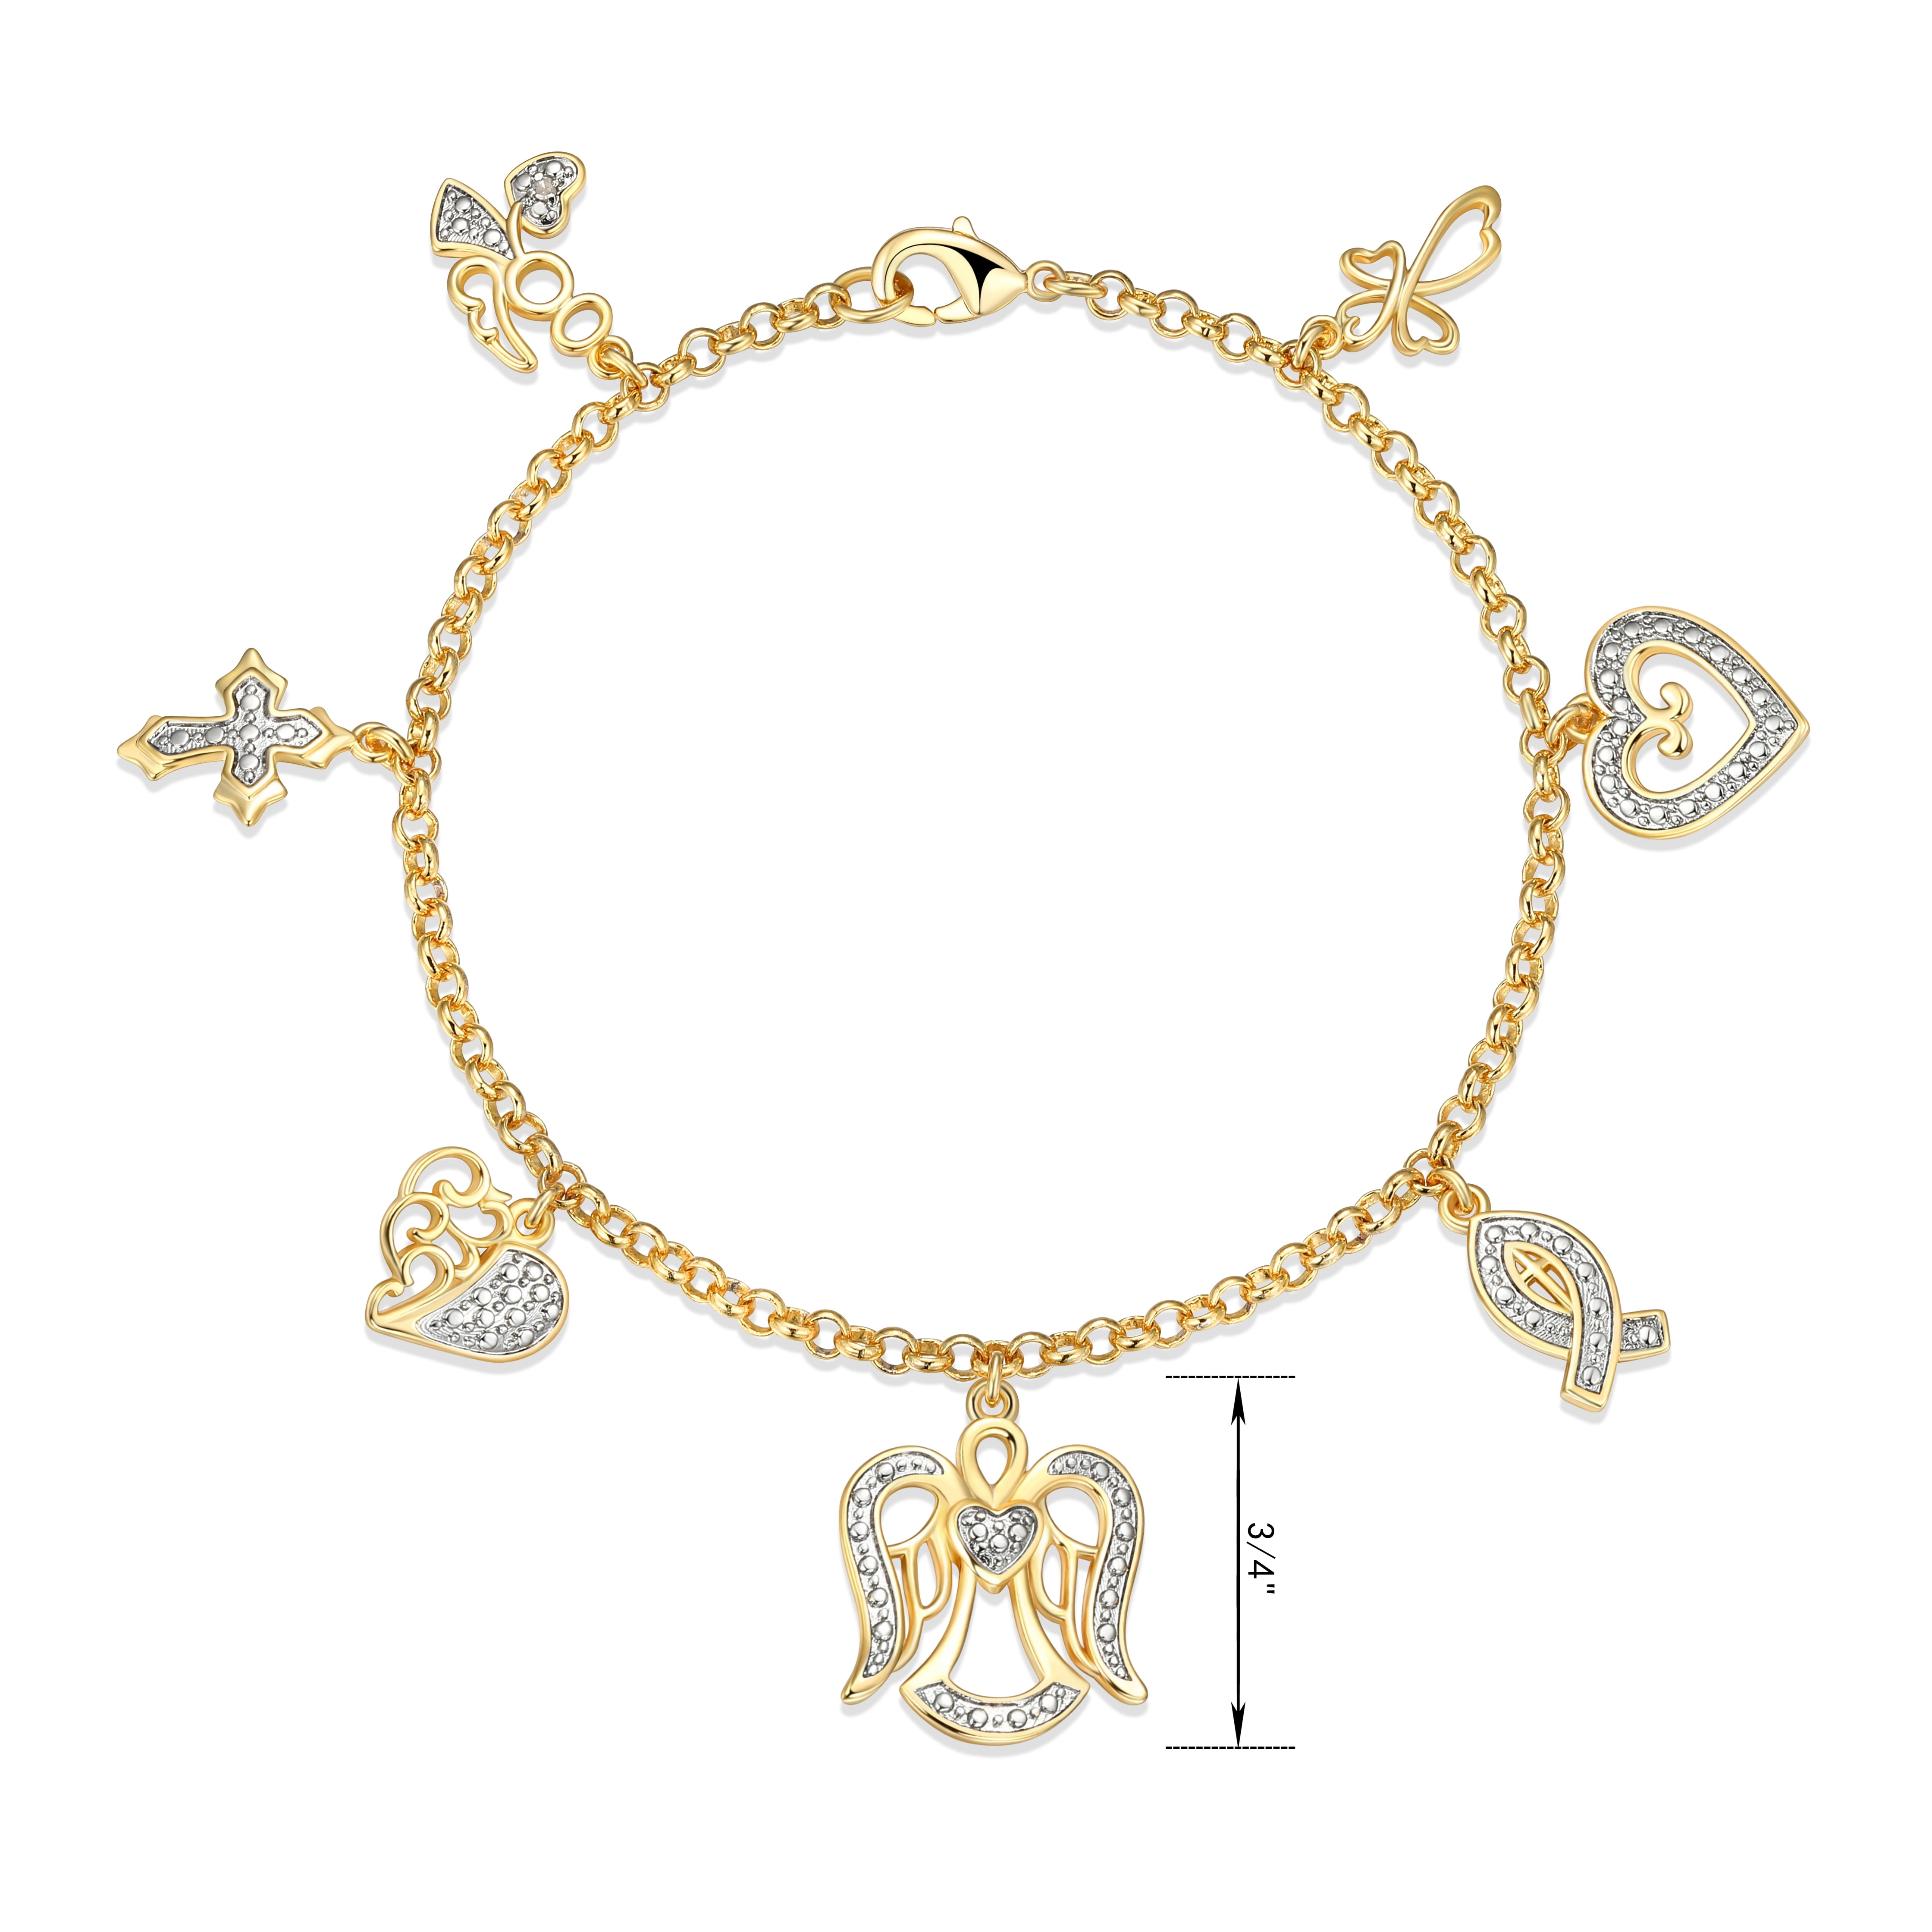 Vintage Gold Charm Bracelet | Fortuna Fine Jewelry Auctions and Appraisers